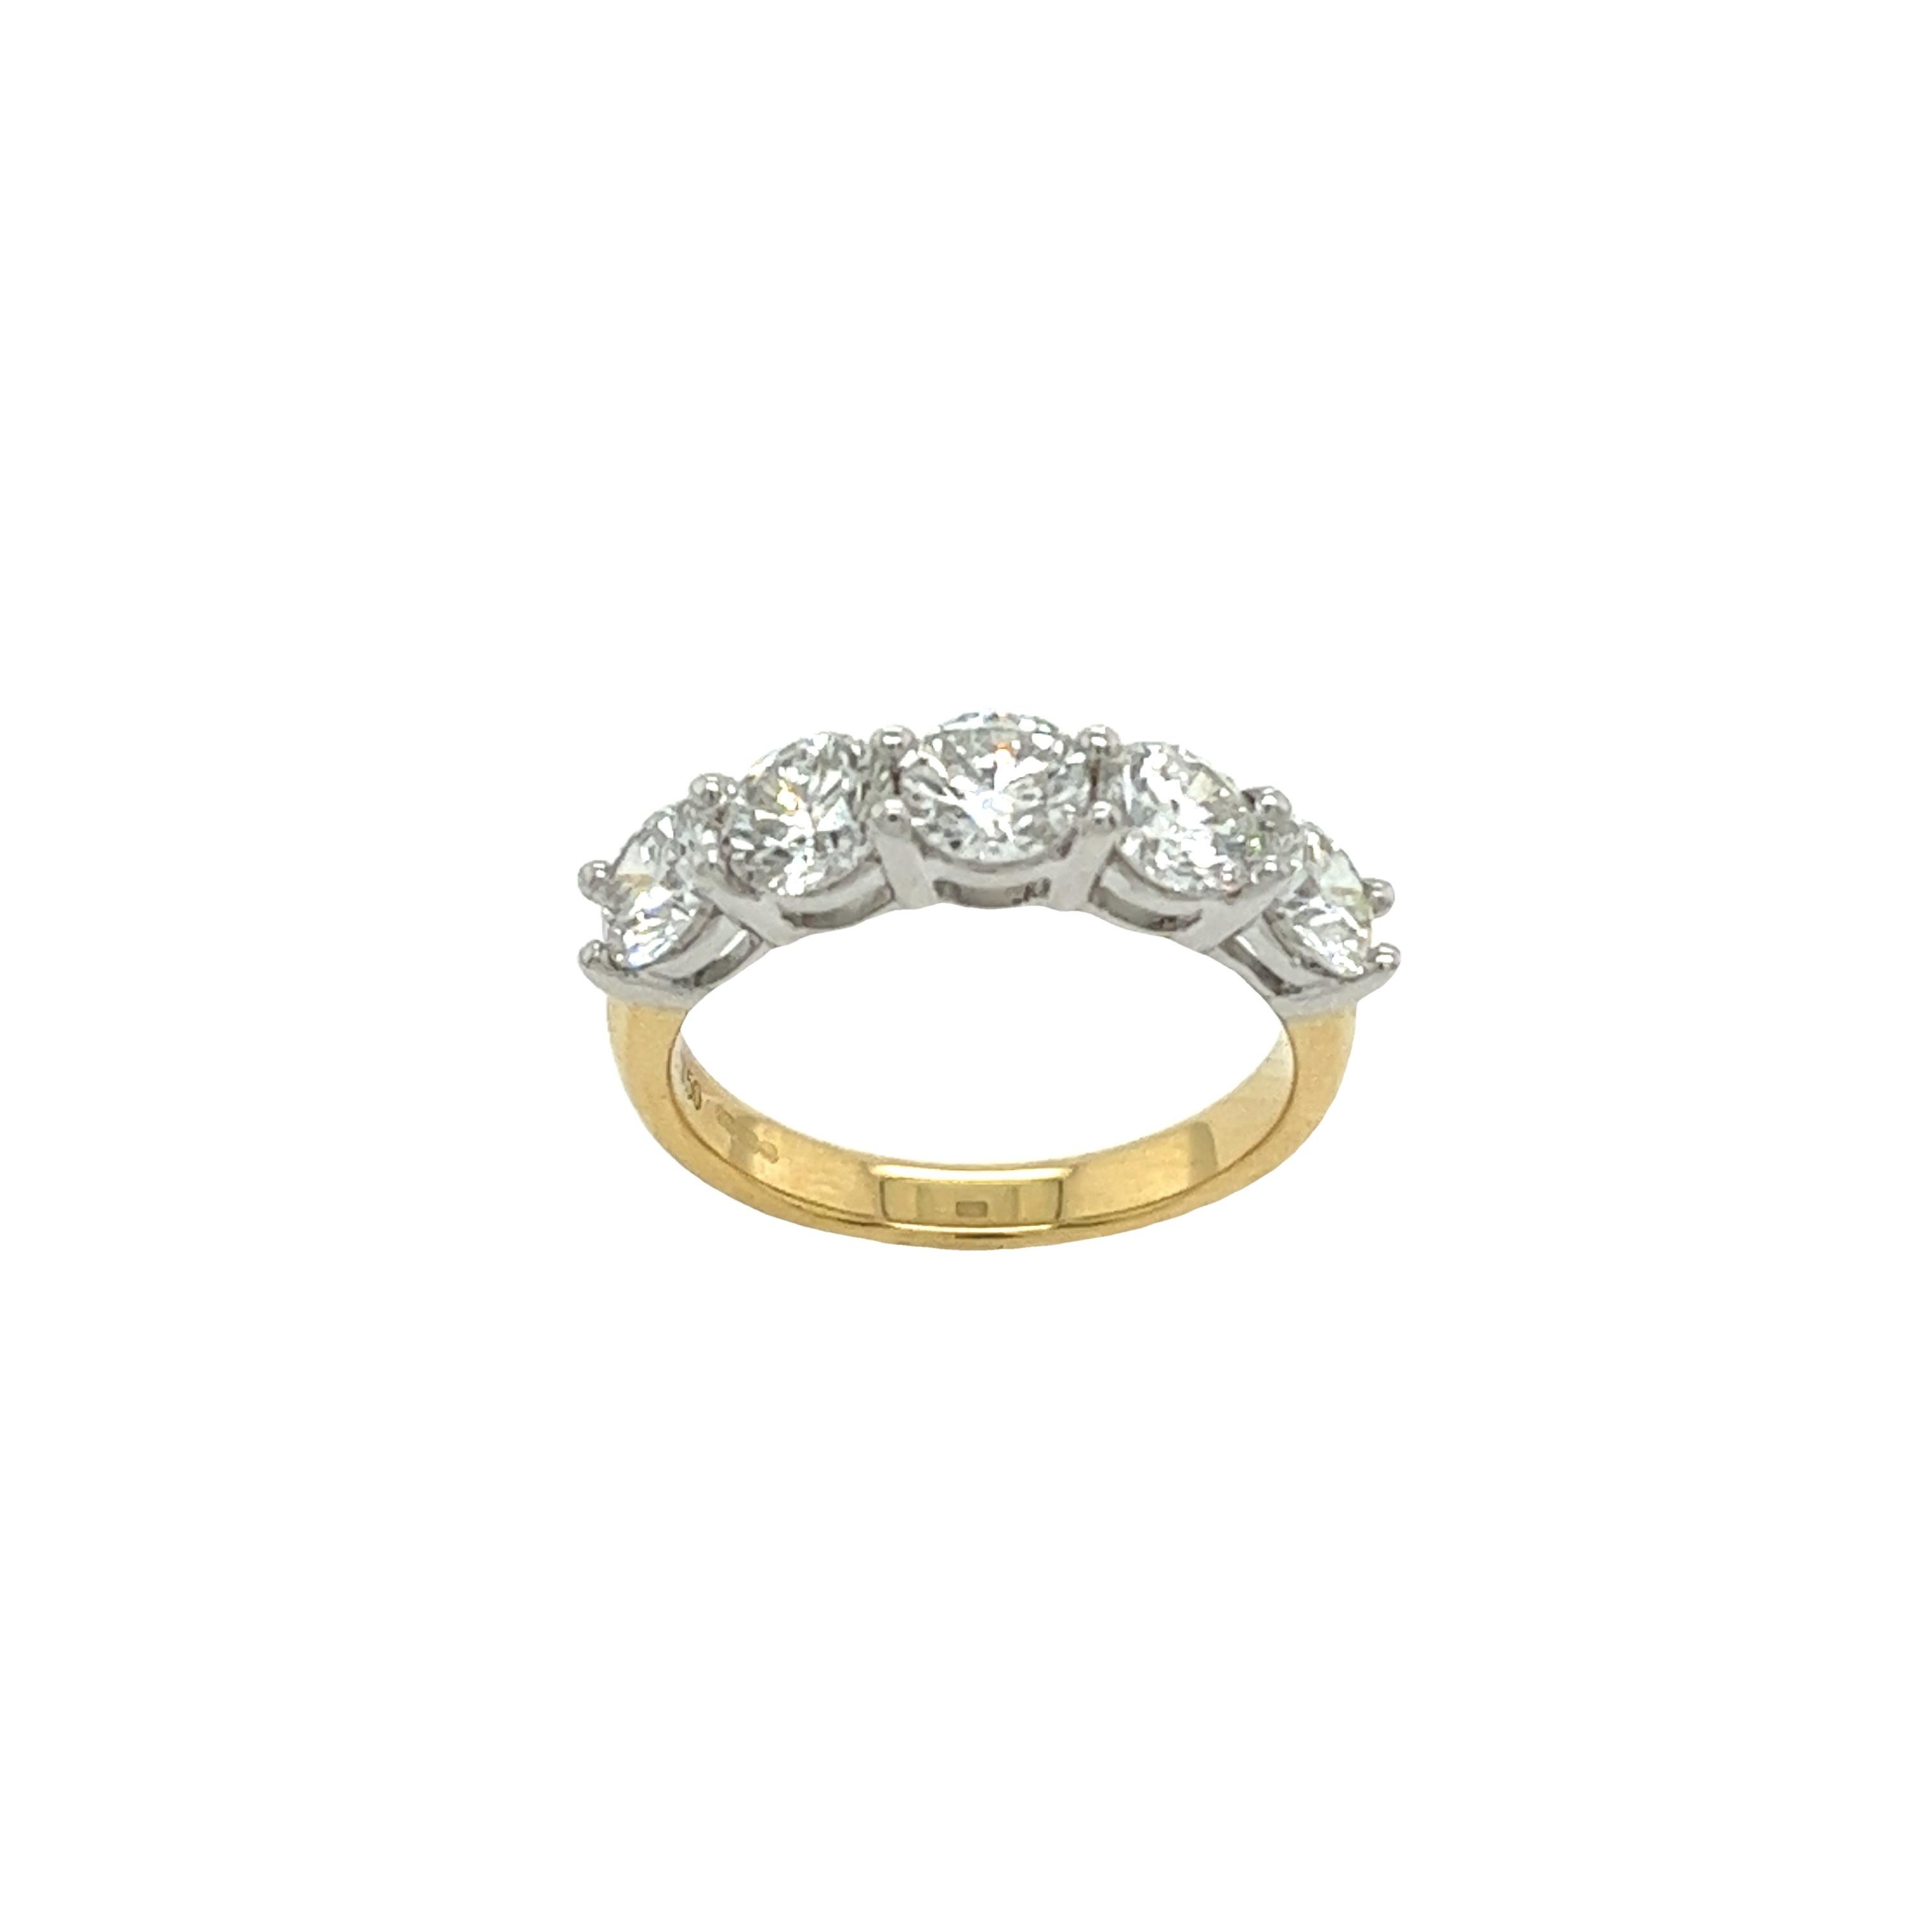 This magnificent diamond 5-stone ring
is set with 2.20ct G colour VS1 clarity round brilliant cut diamonds.
Set in yellow & white 18ct gold.
This ring is elegant and beautiful for a wedding ring or anniversary ring.
Total Diamond Weight: 2.20ct